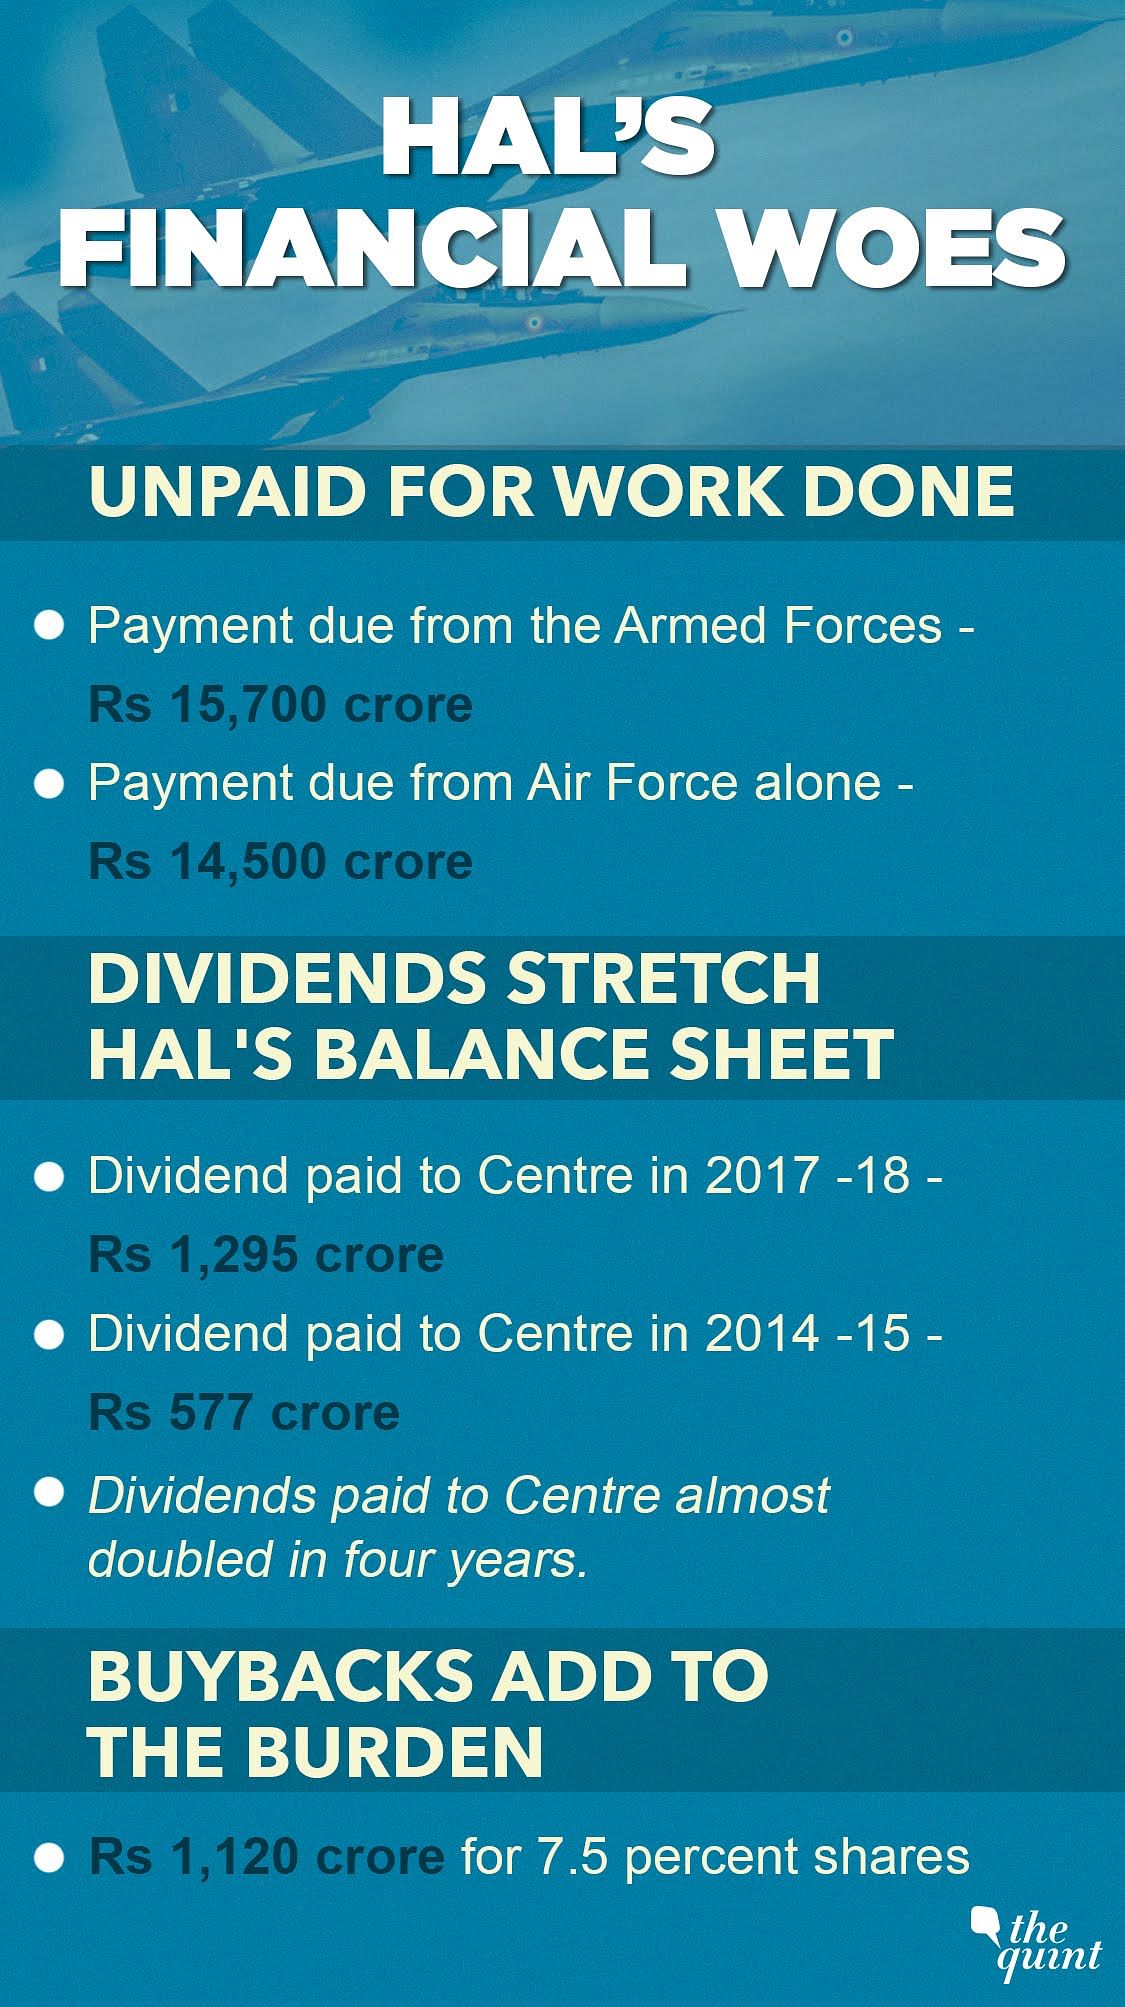 As much as the unpaid dues from IAF, dividends paid to the government have hit the PSU’s balance sheet